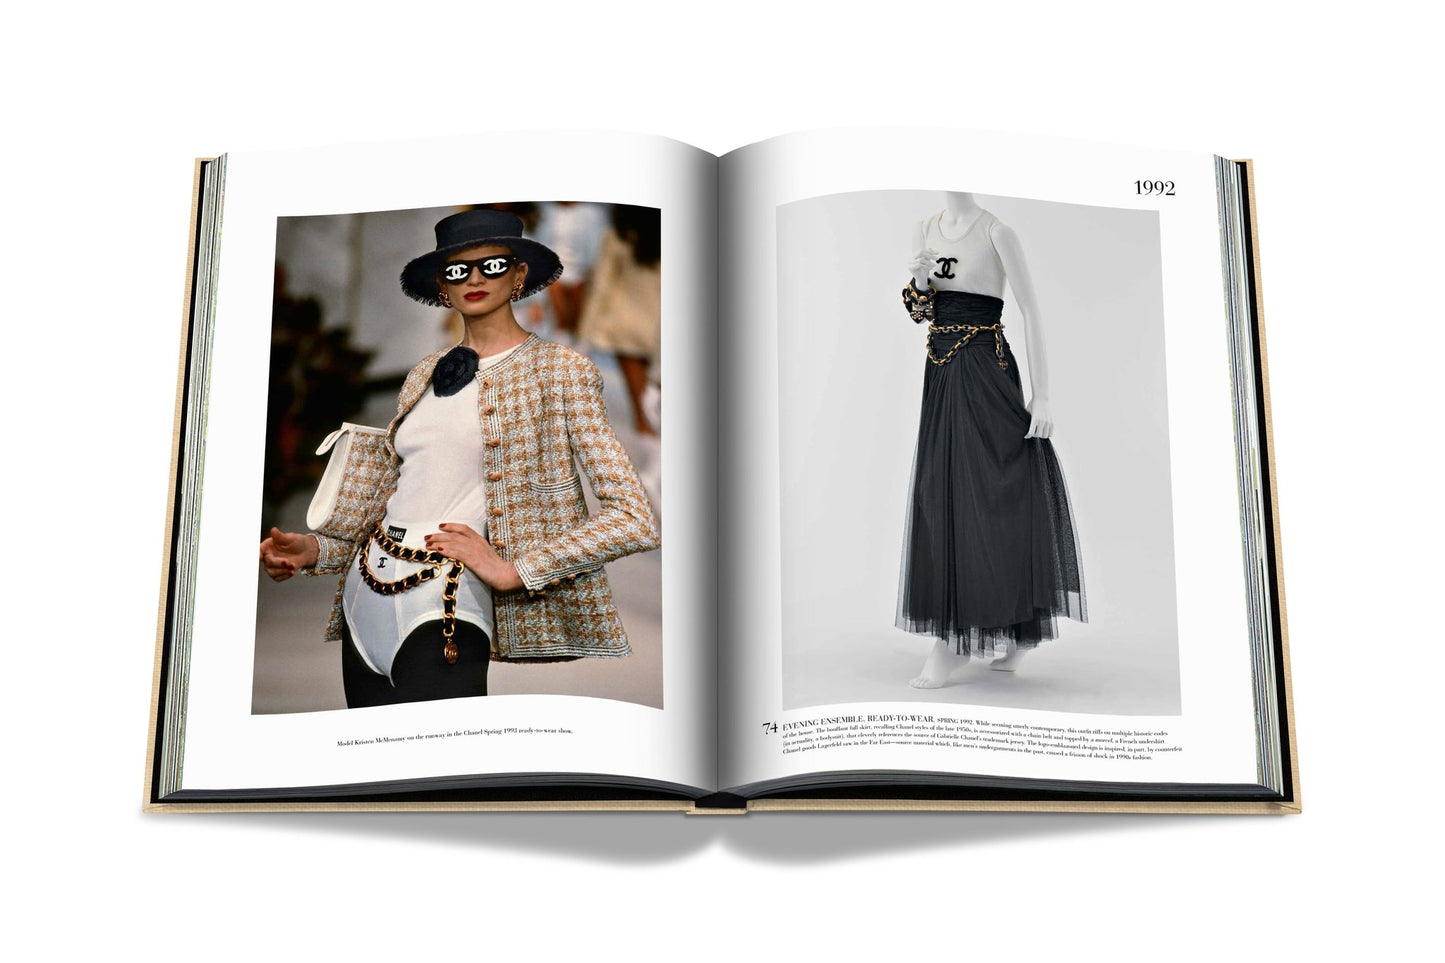 Chanel book: Impossible collection